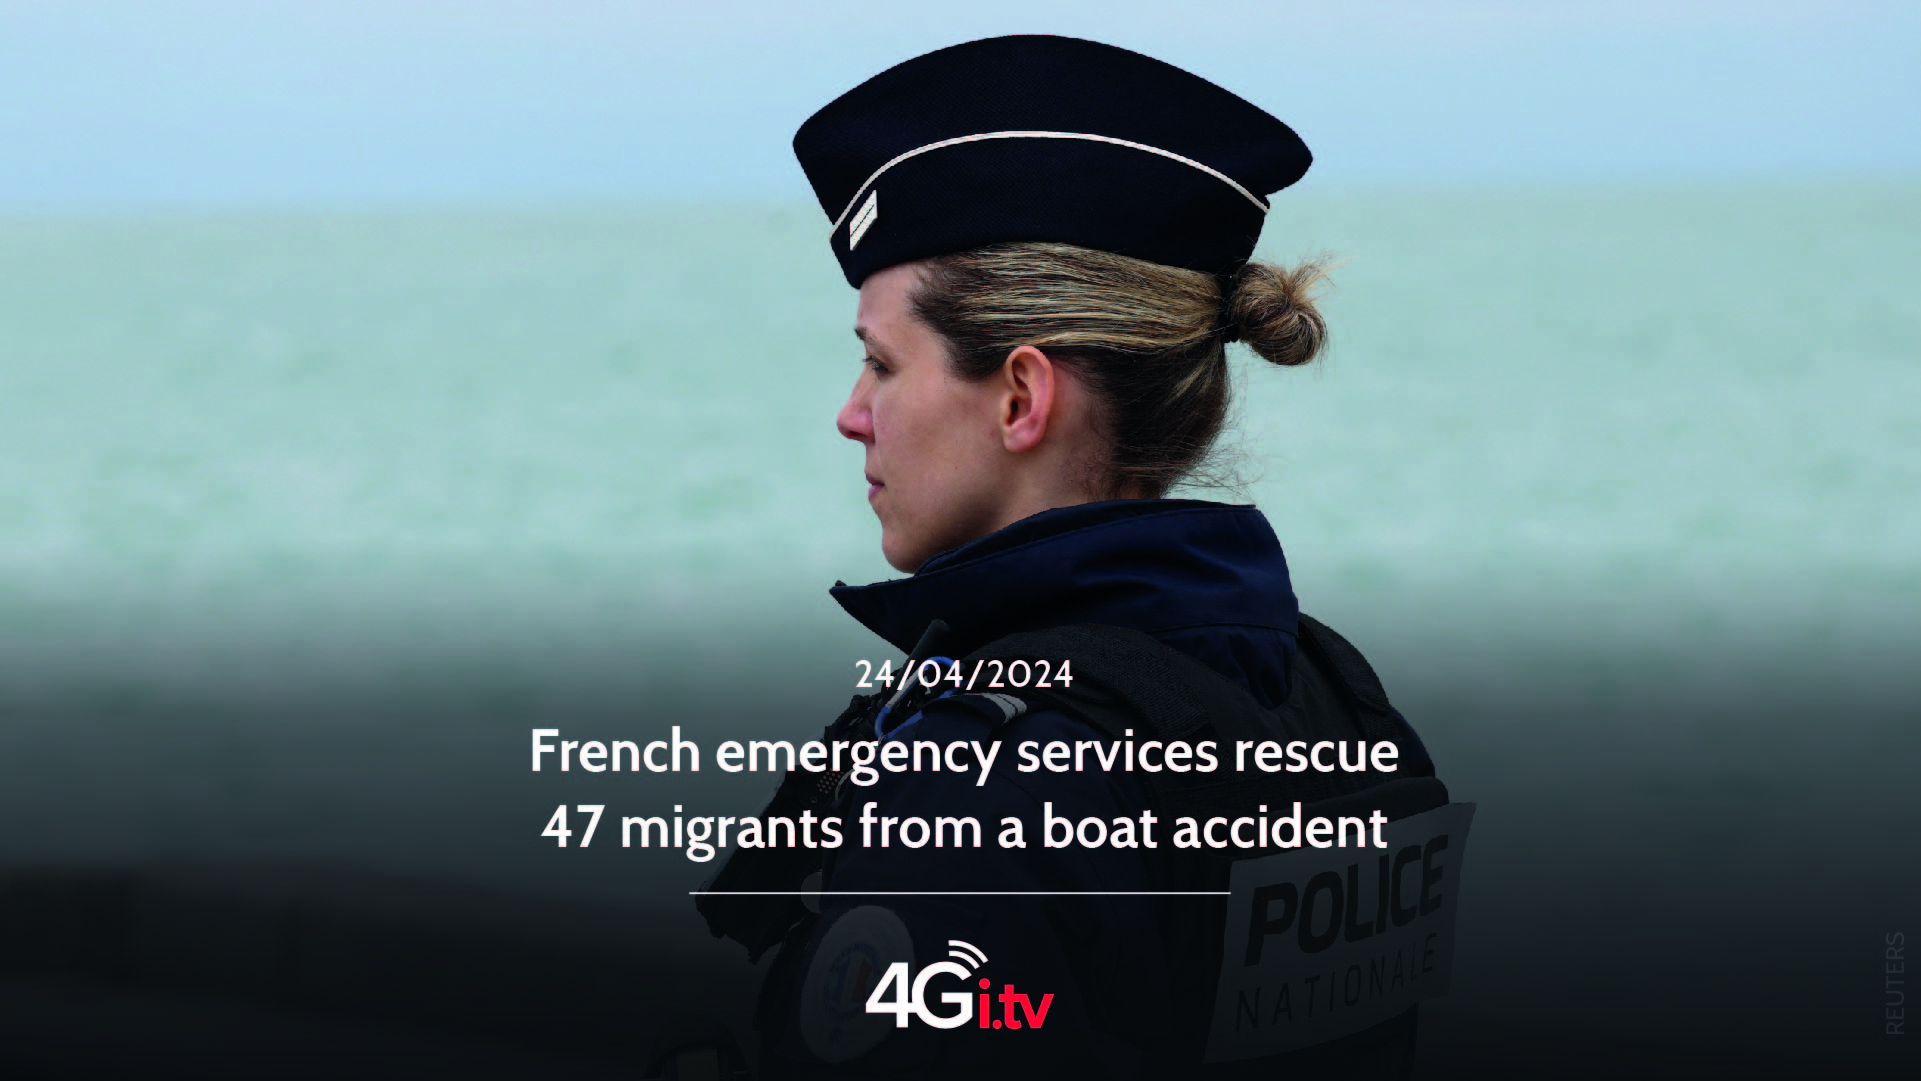 Подробнее о статье French emergency services rescue 47 migrants from a boat accident